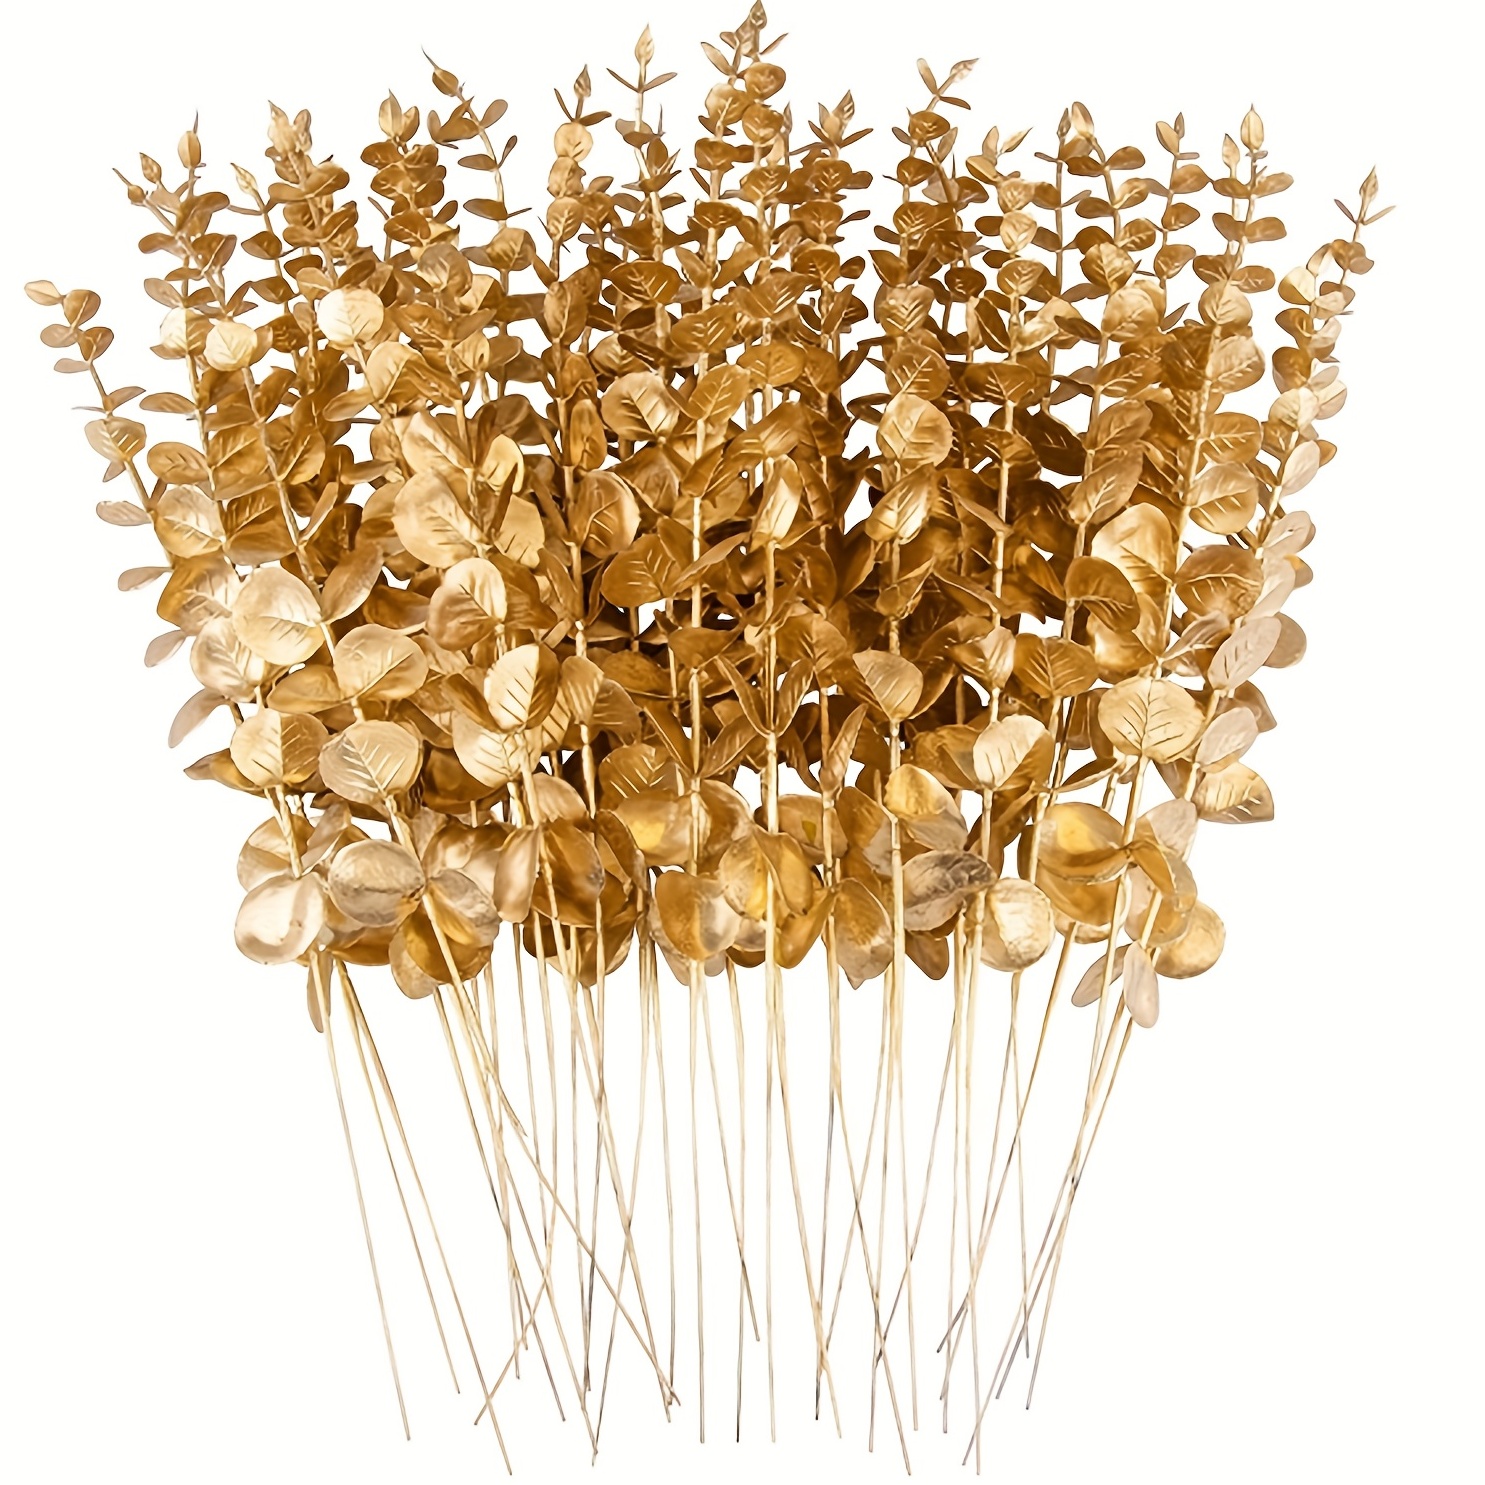 Gold Leaves Decorations for Christmas Artificial Golden Plants Fake Leaf -  17 Inch 5 Pack, Faux Foliage Simulation Flowers Grass Xmas Decor Plant